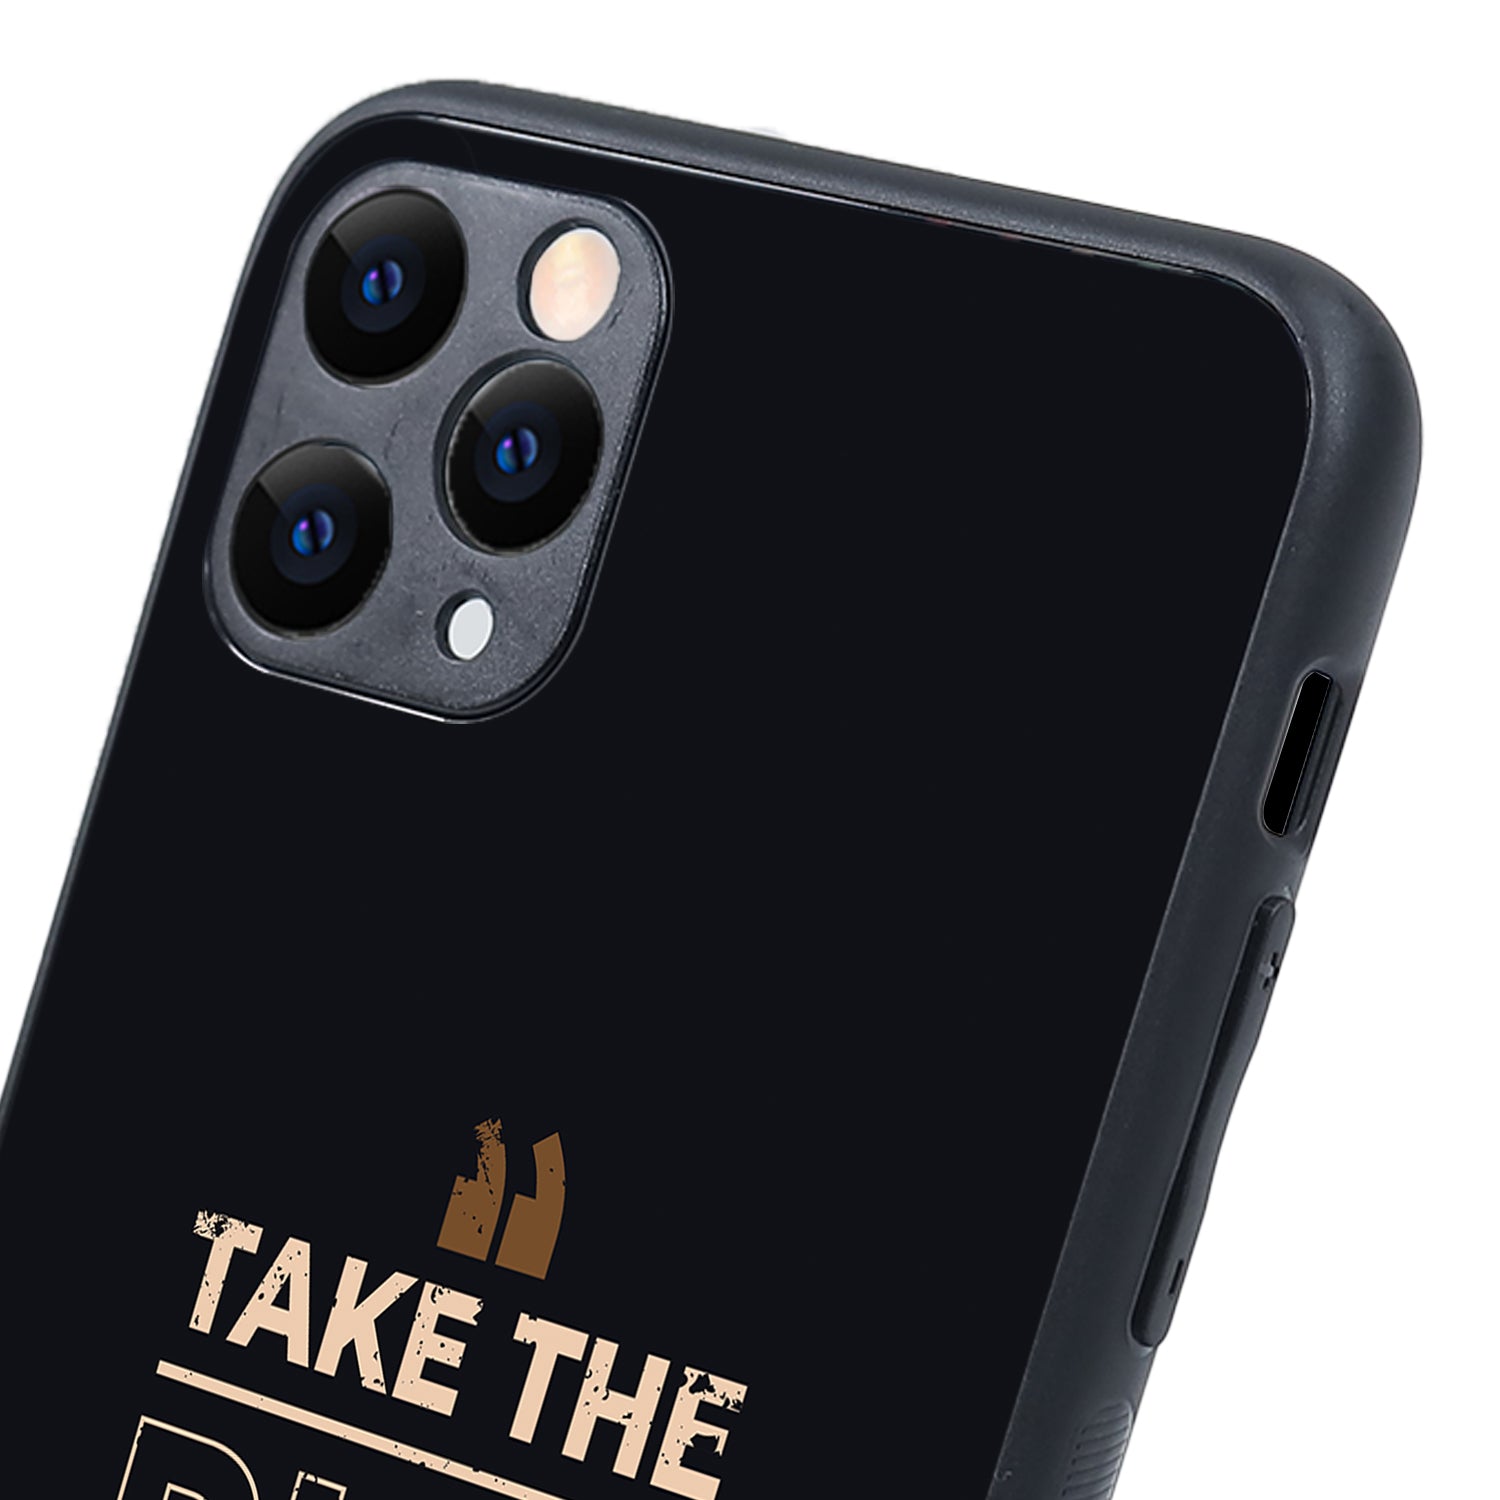 Take Risk Trading iPhone 11 Pro Max Case